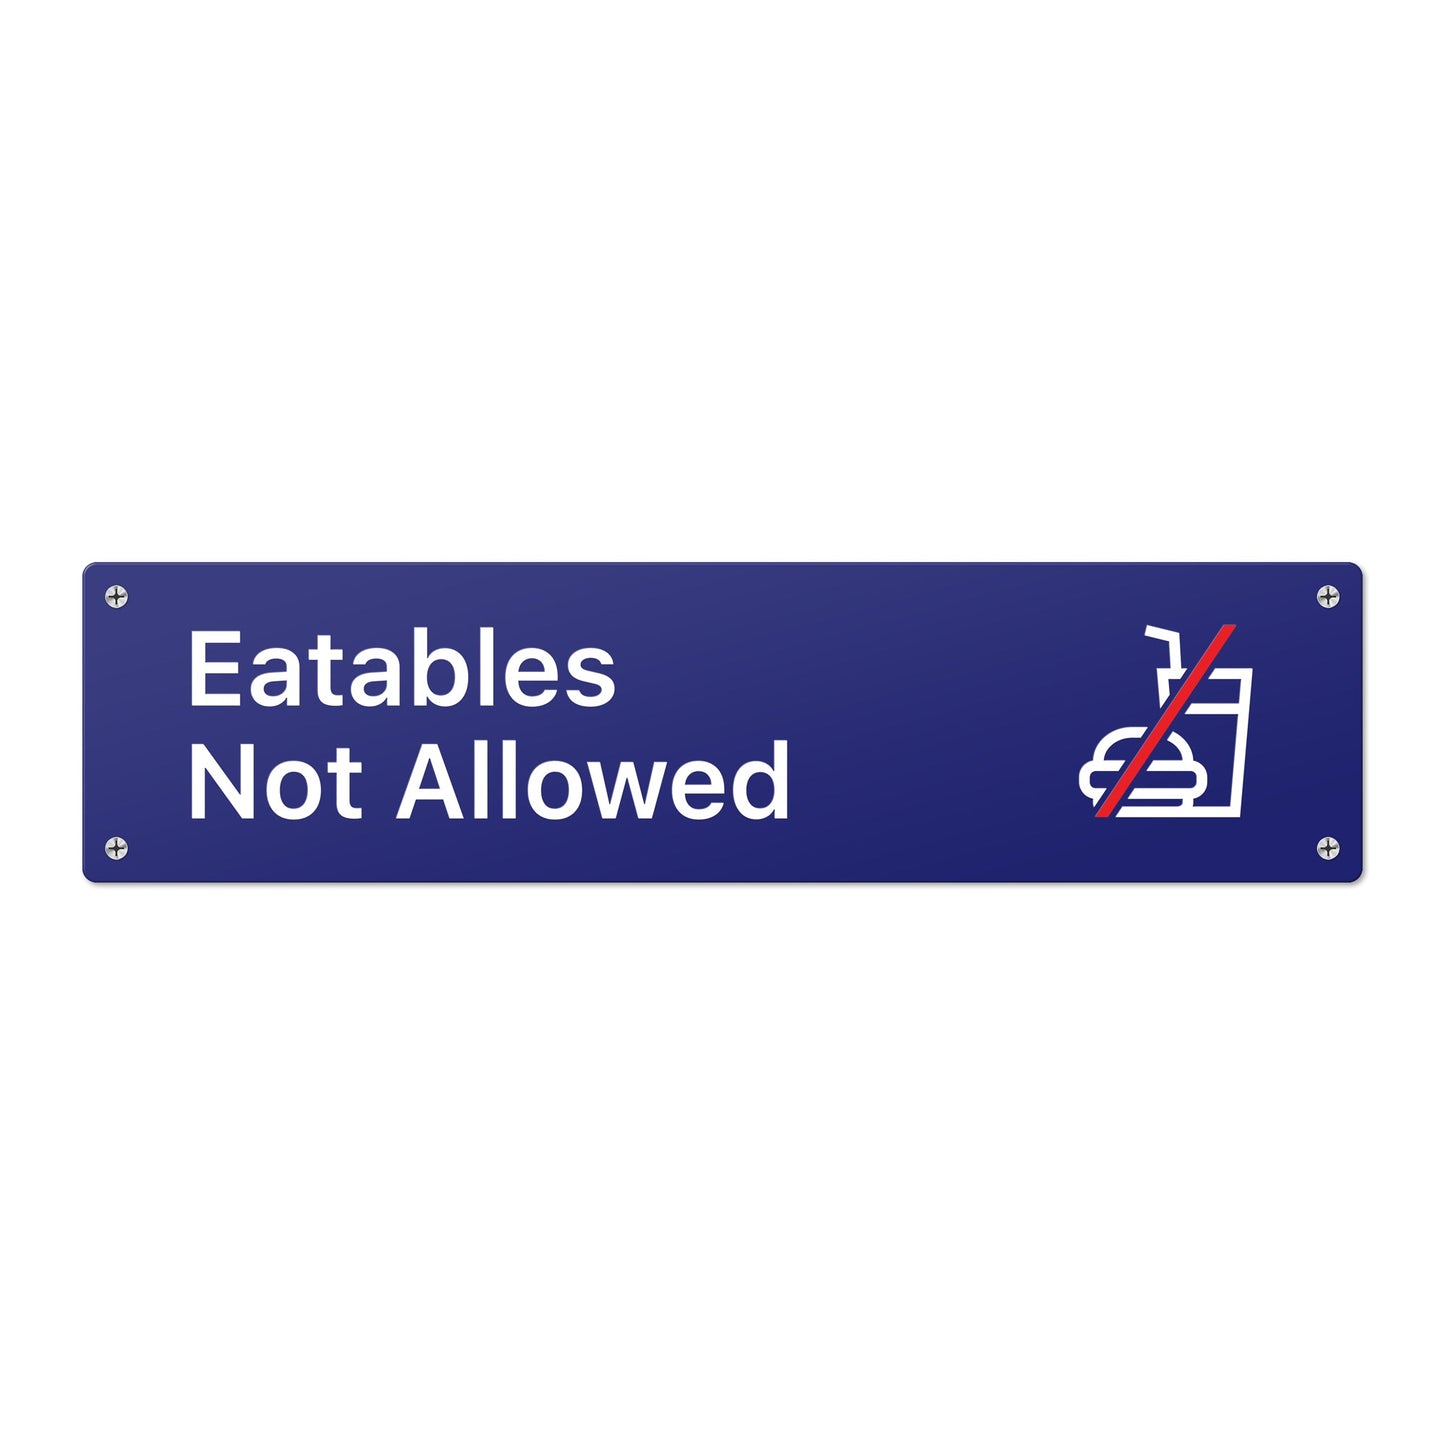 Eatables Not Allowed